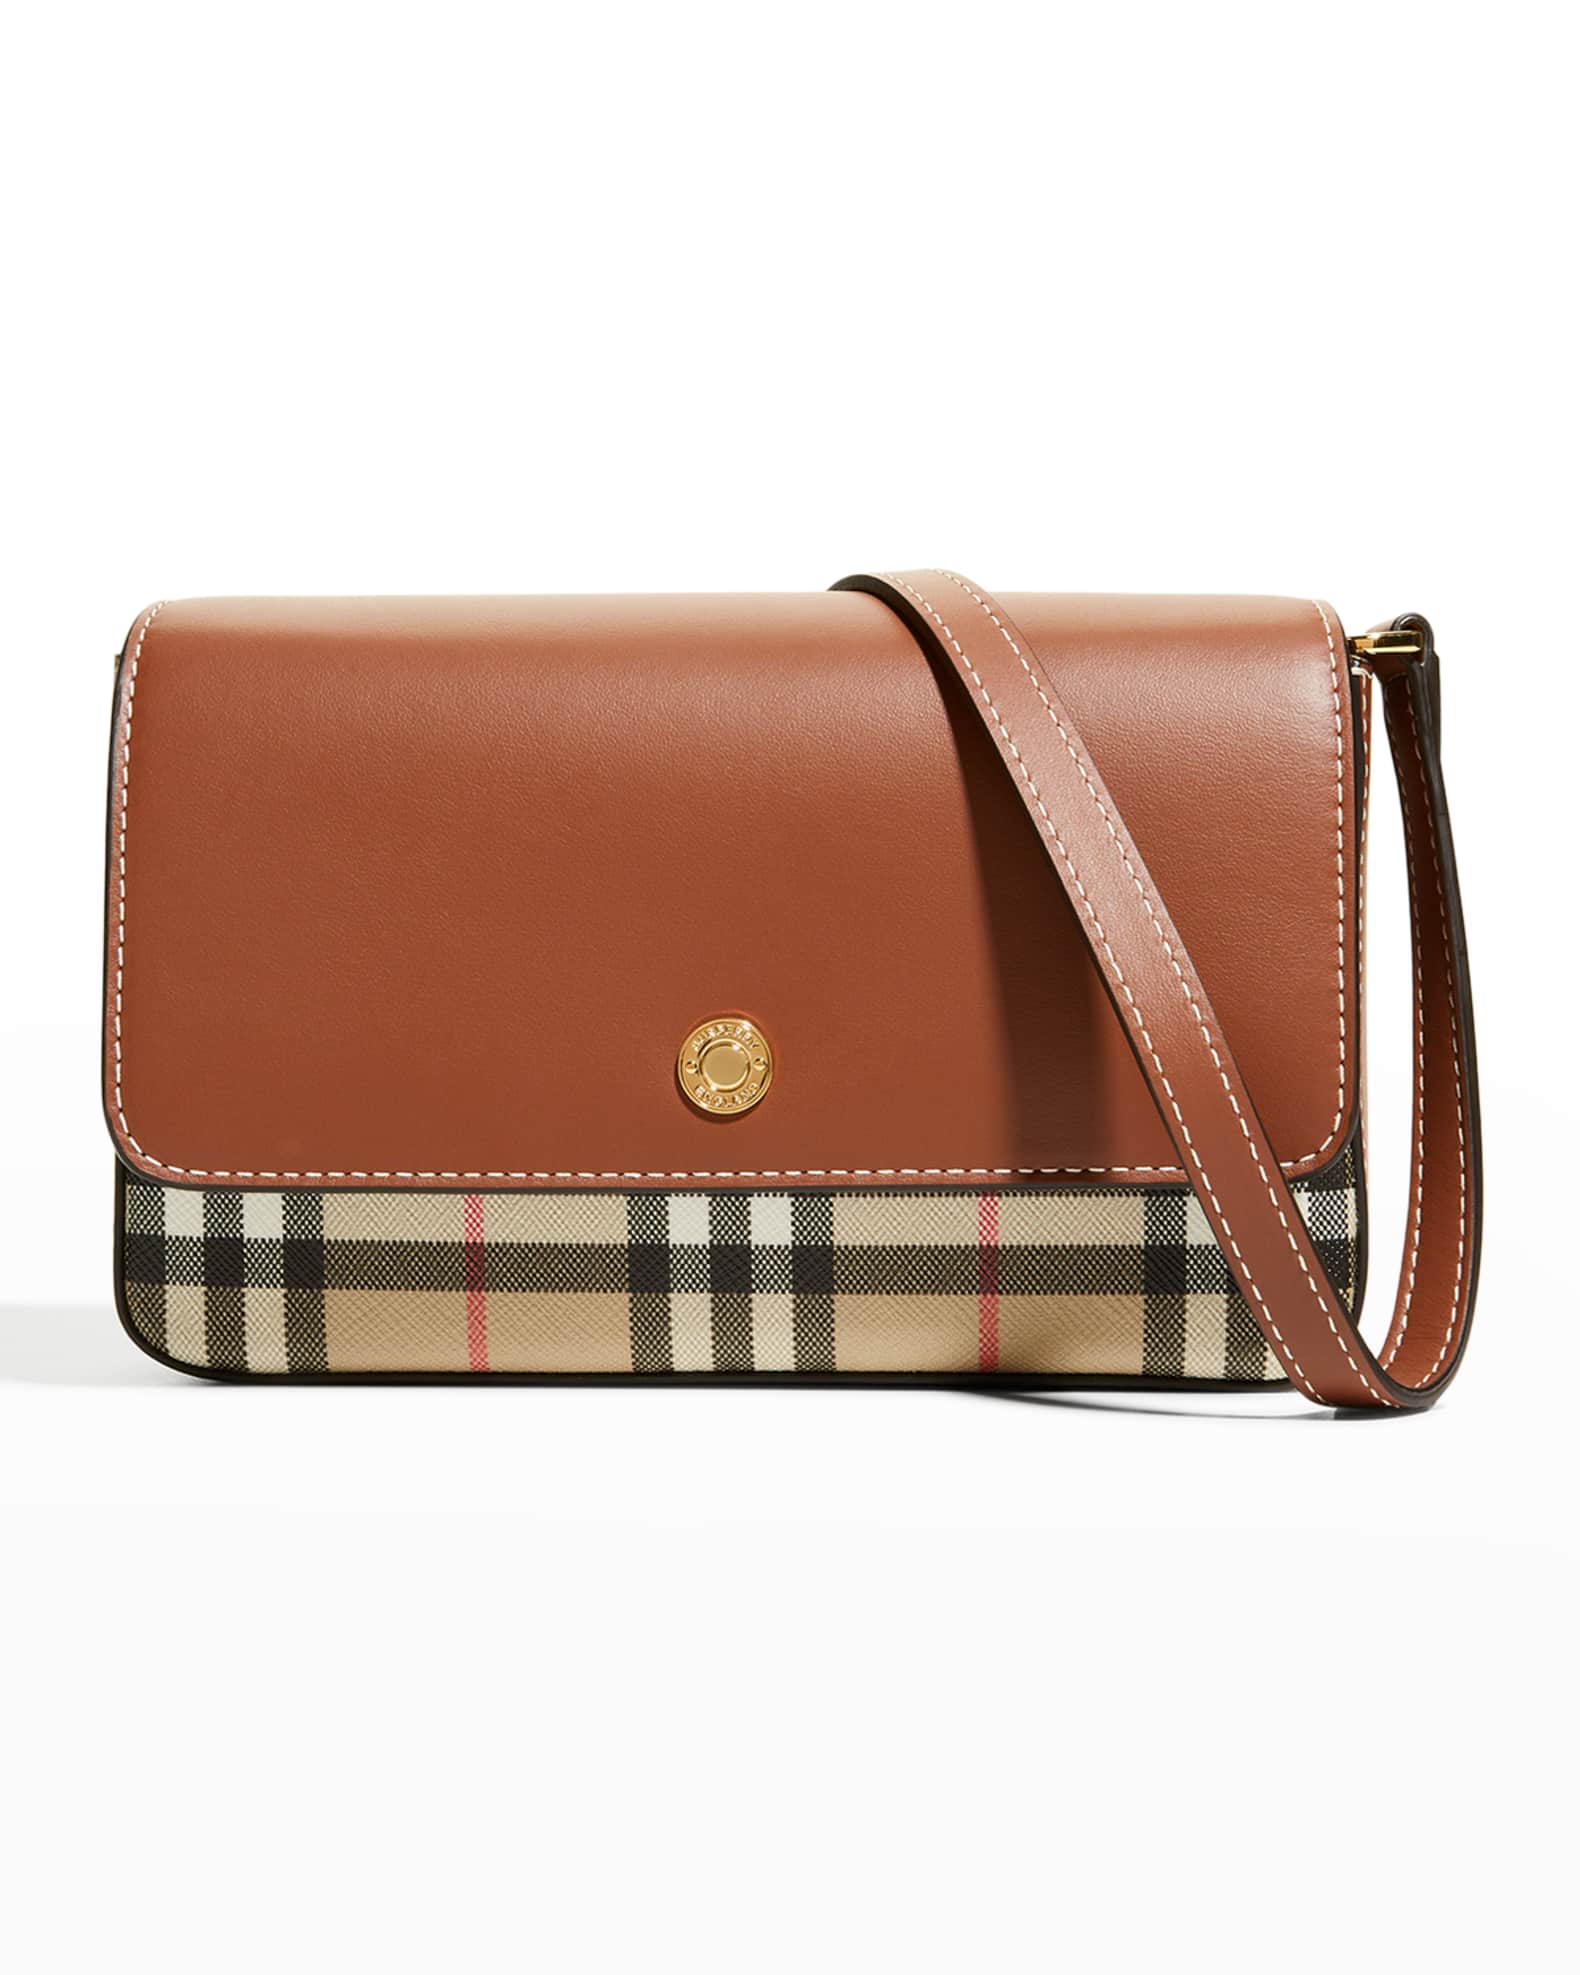 Burberry New Hampshire Check Canvas & Leather Crossbody Bag | Neiman Marcus